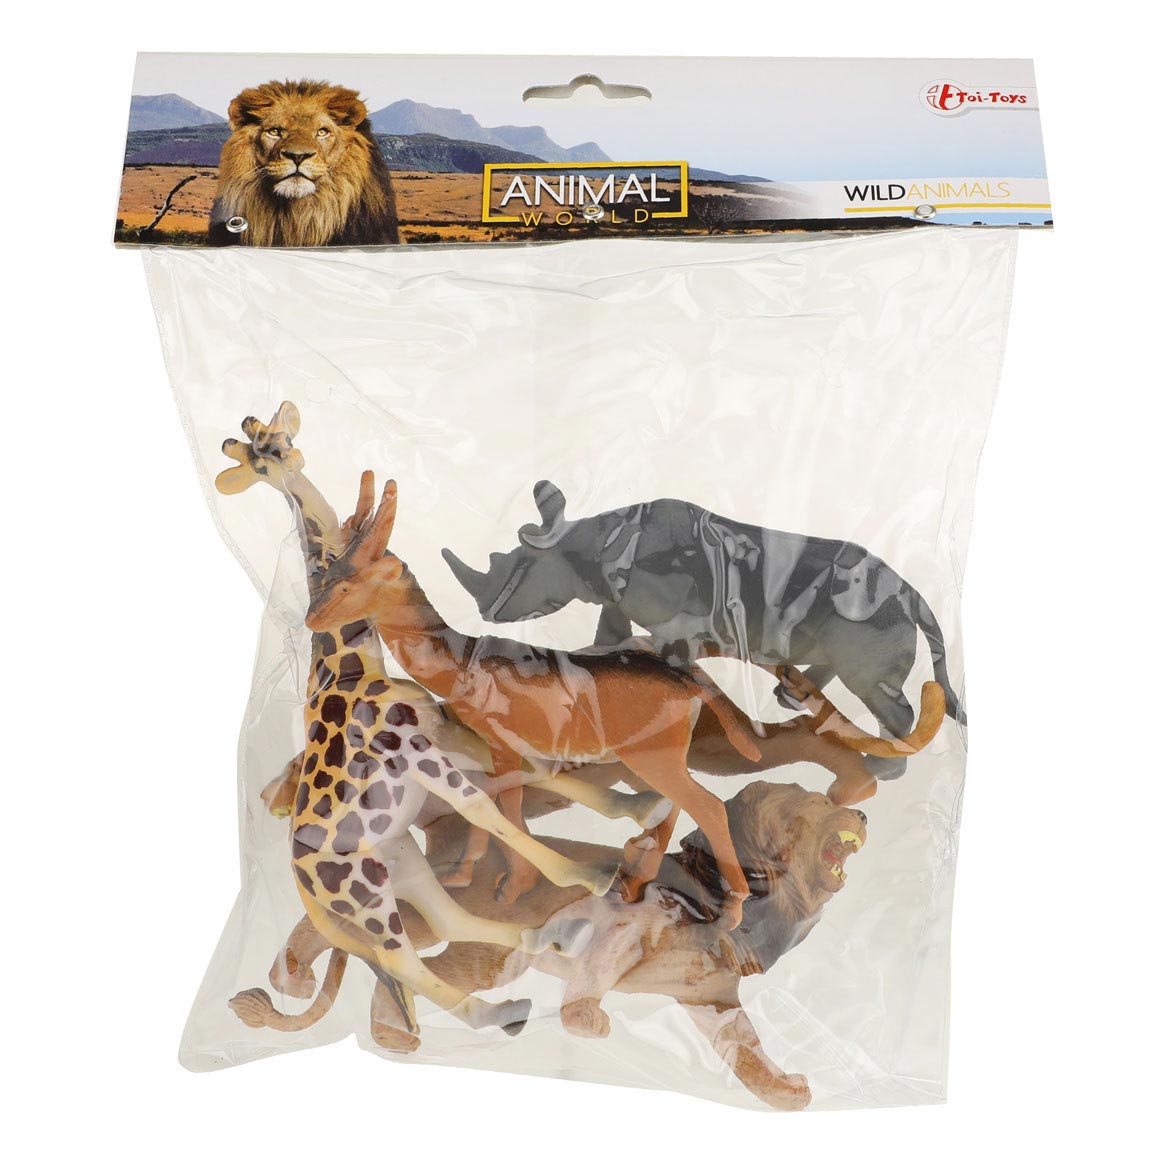 Animal World Animaux sauvages Deluxe, 5 pièces.